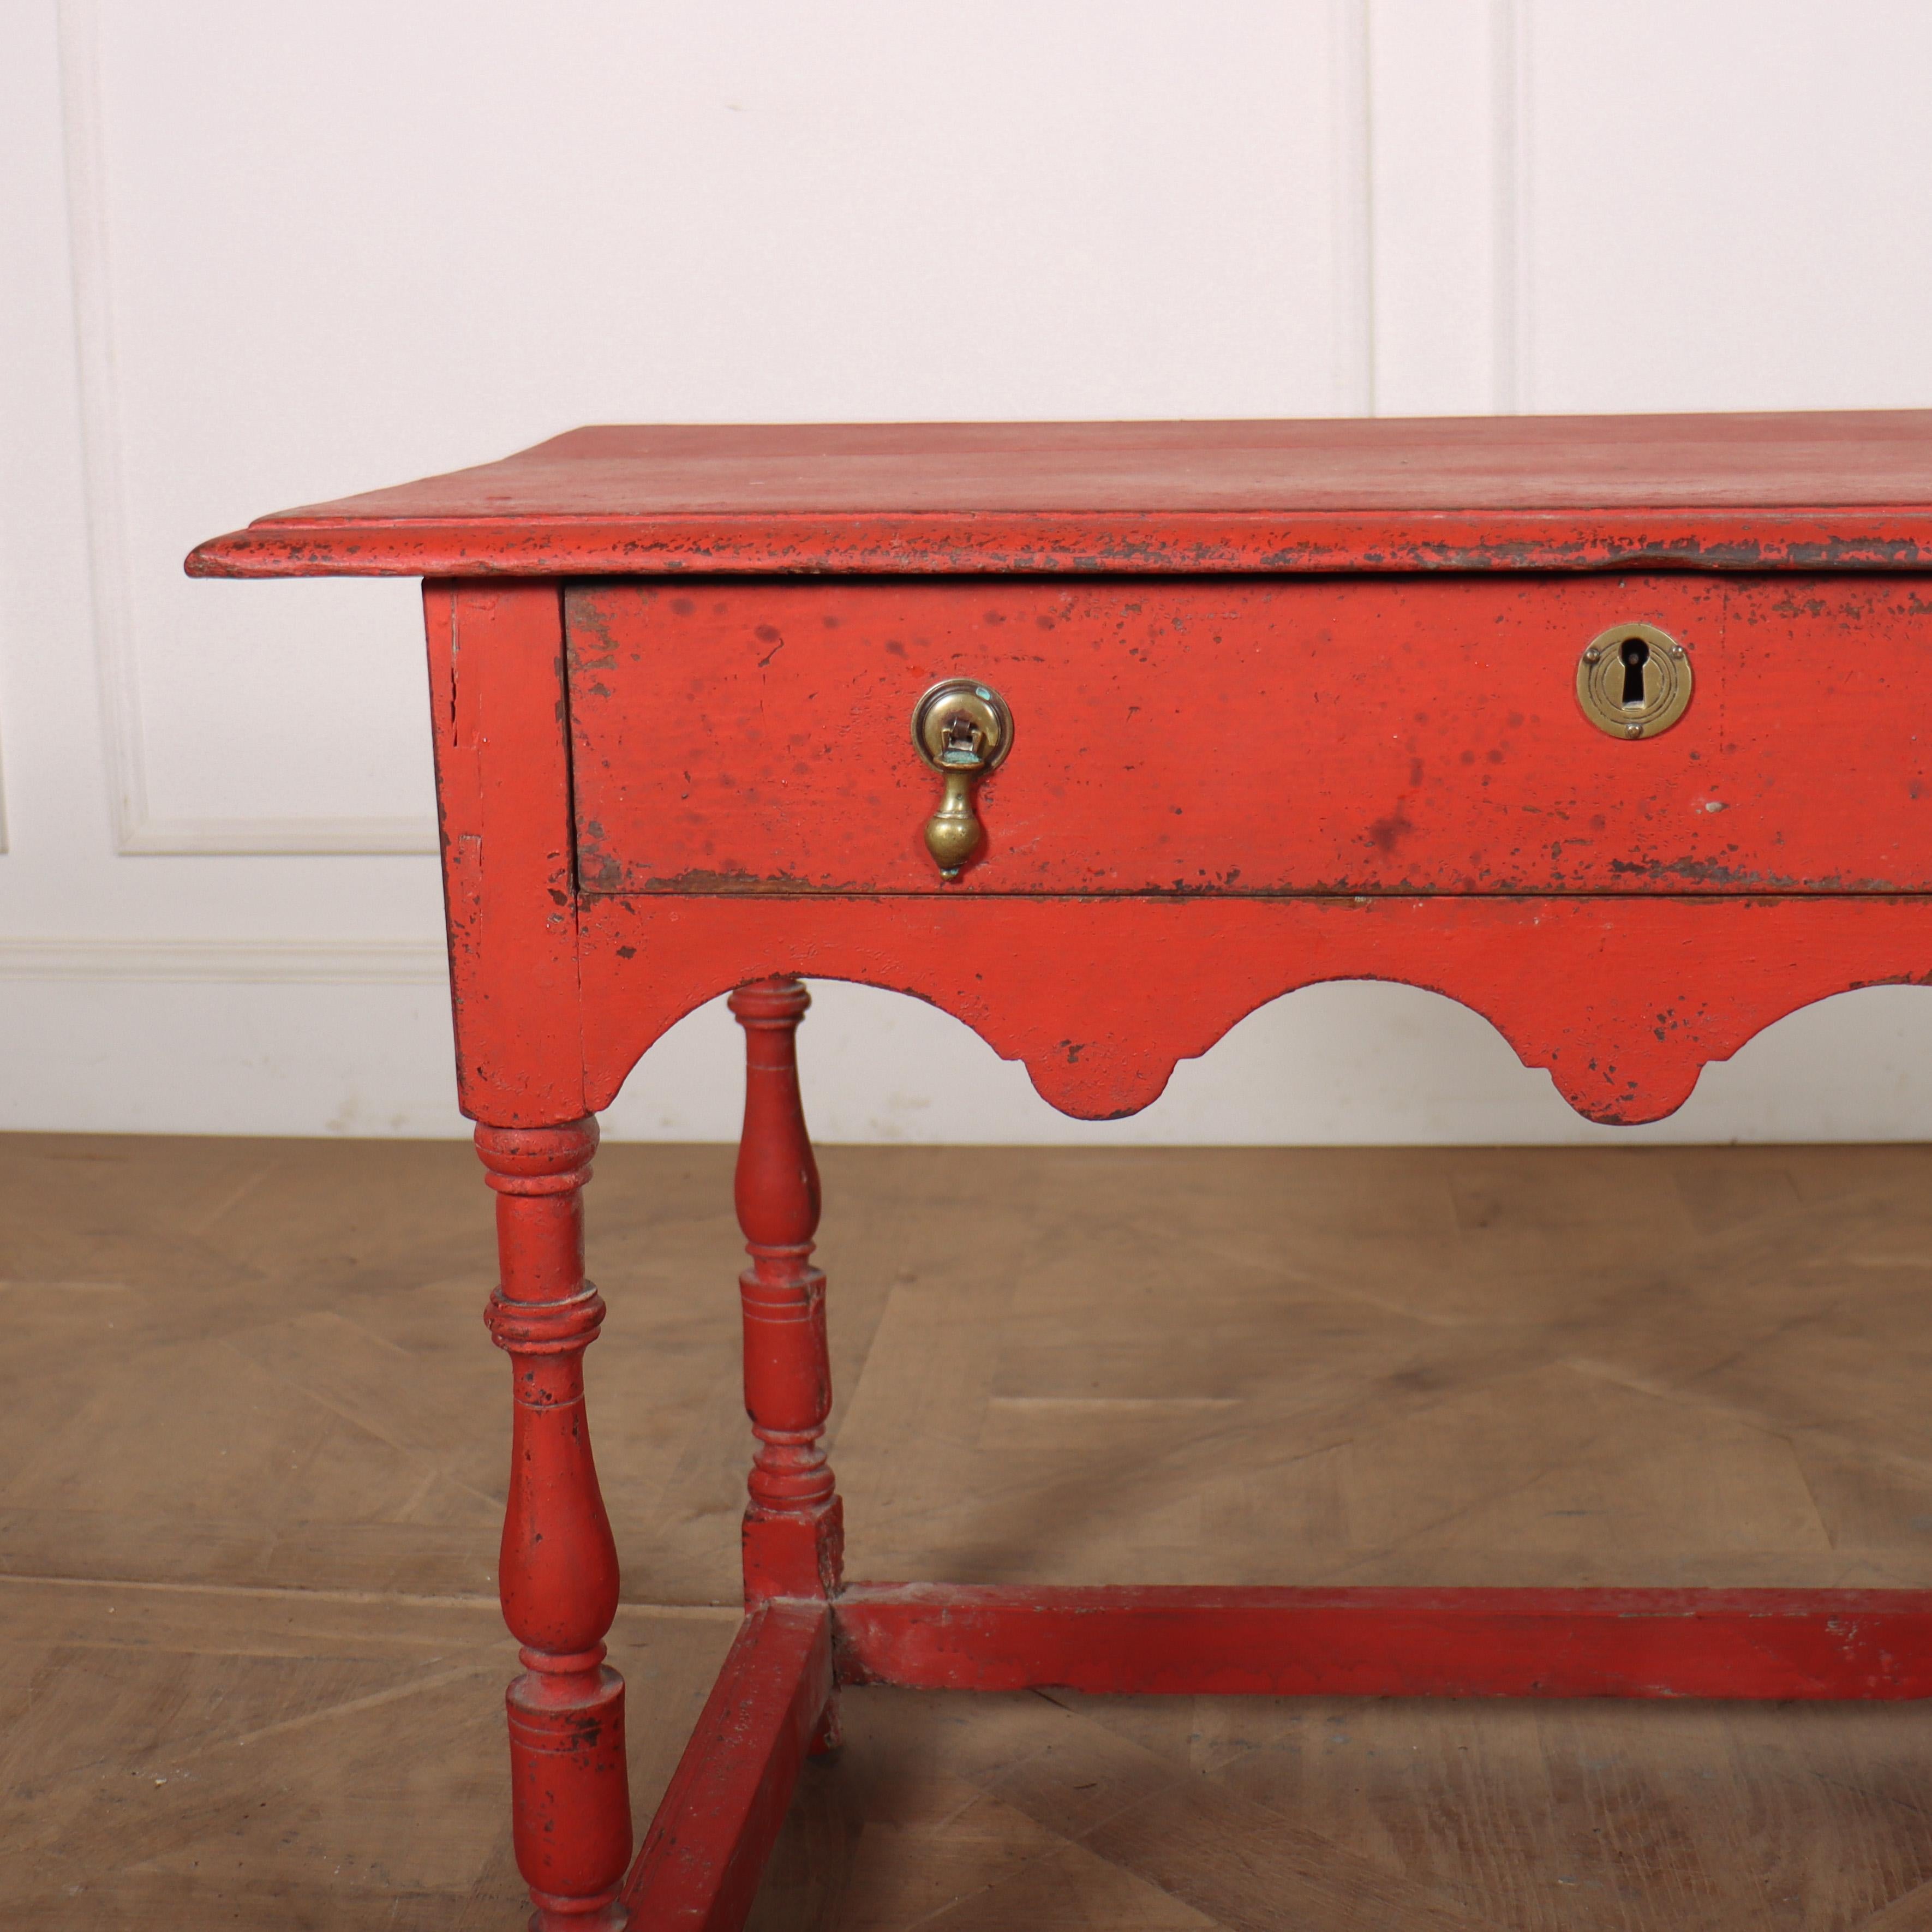 18th C English one drawer painted lamp table with a decorative frieze. 1760.

Reference: 8300

Dimensions
36 inches (91 cms) Wide
20 inches (51 cms) Deep
26 inches (66 cms) High